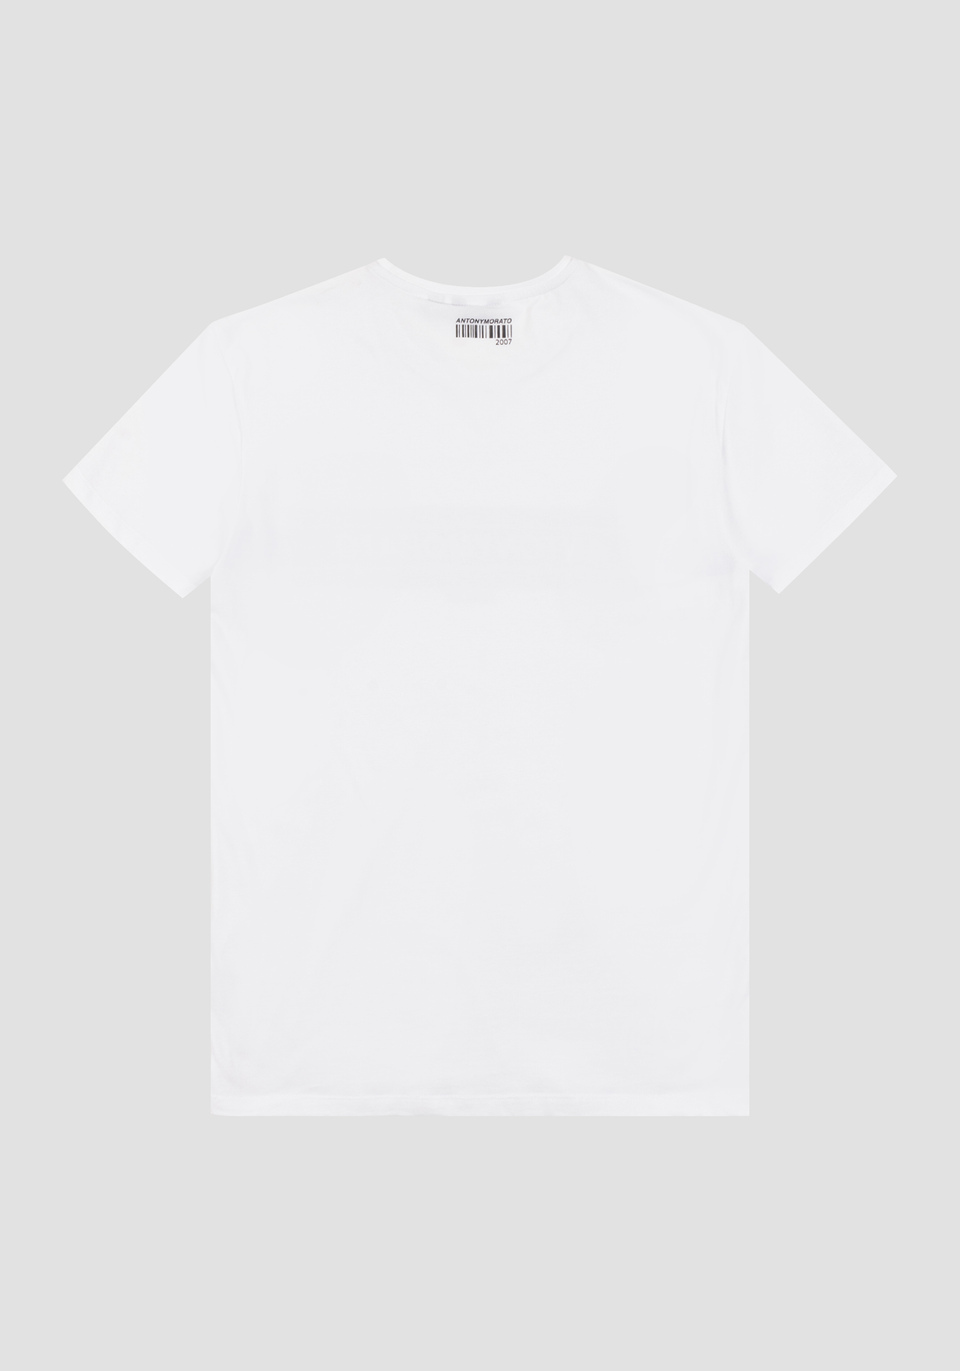 SLIM-FIT T-SHIRT IN SOFT STRETCH-COTTON WITH LOGO DETAIL - Antony Morato Online Shop